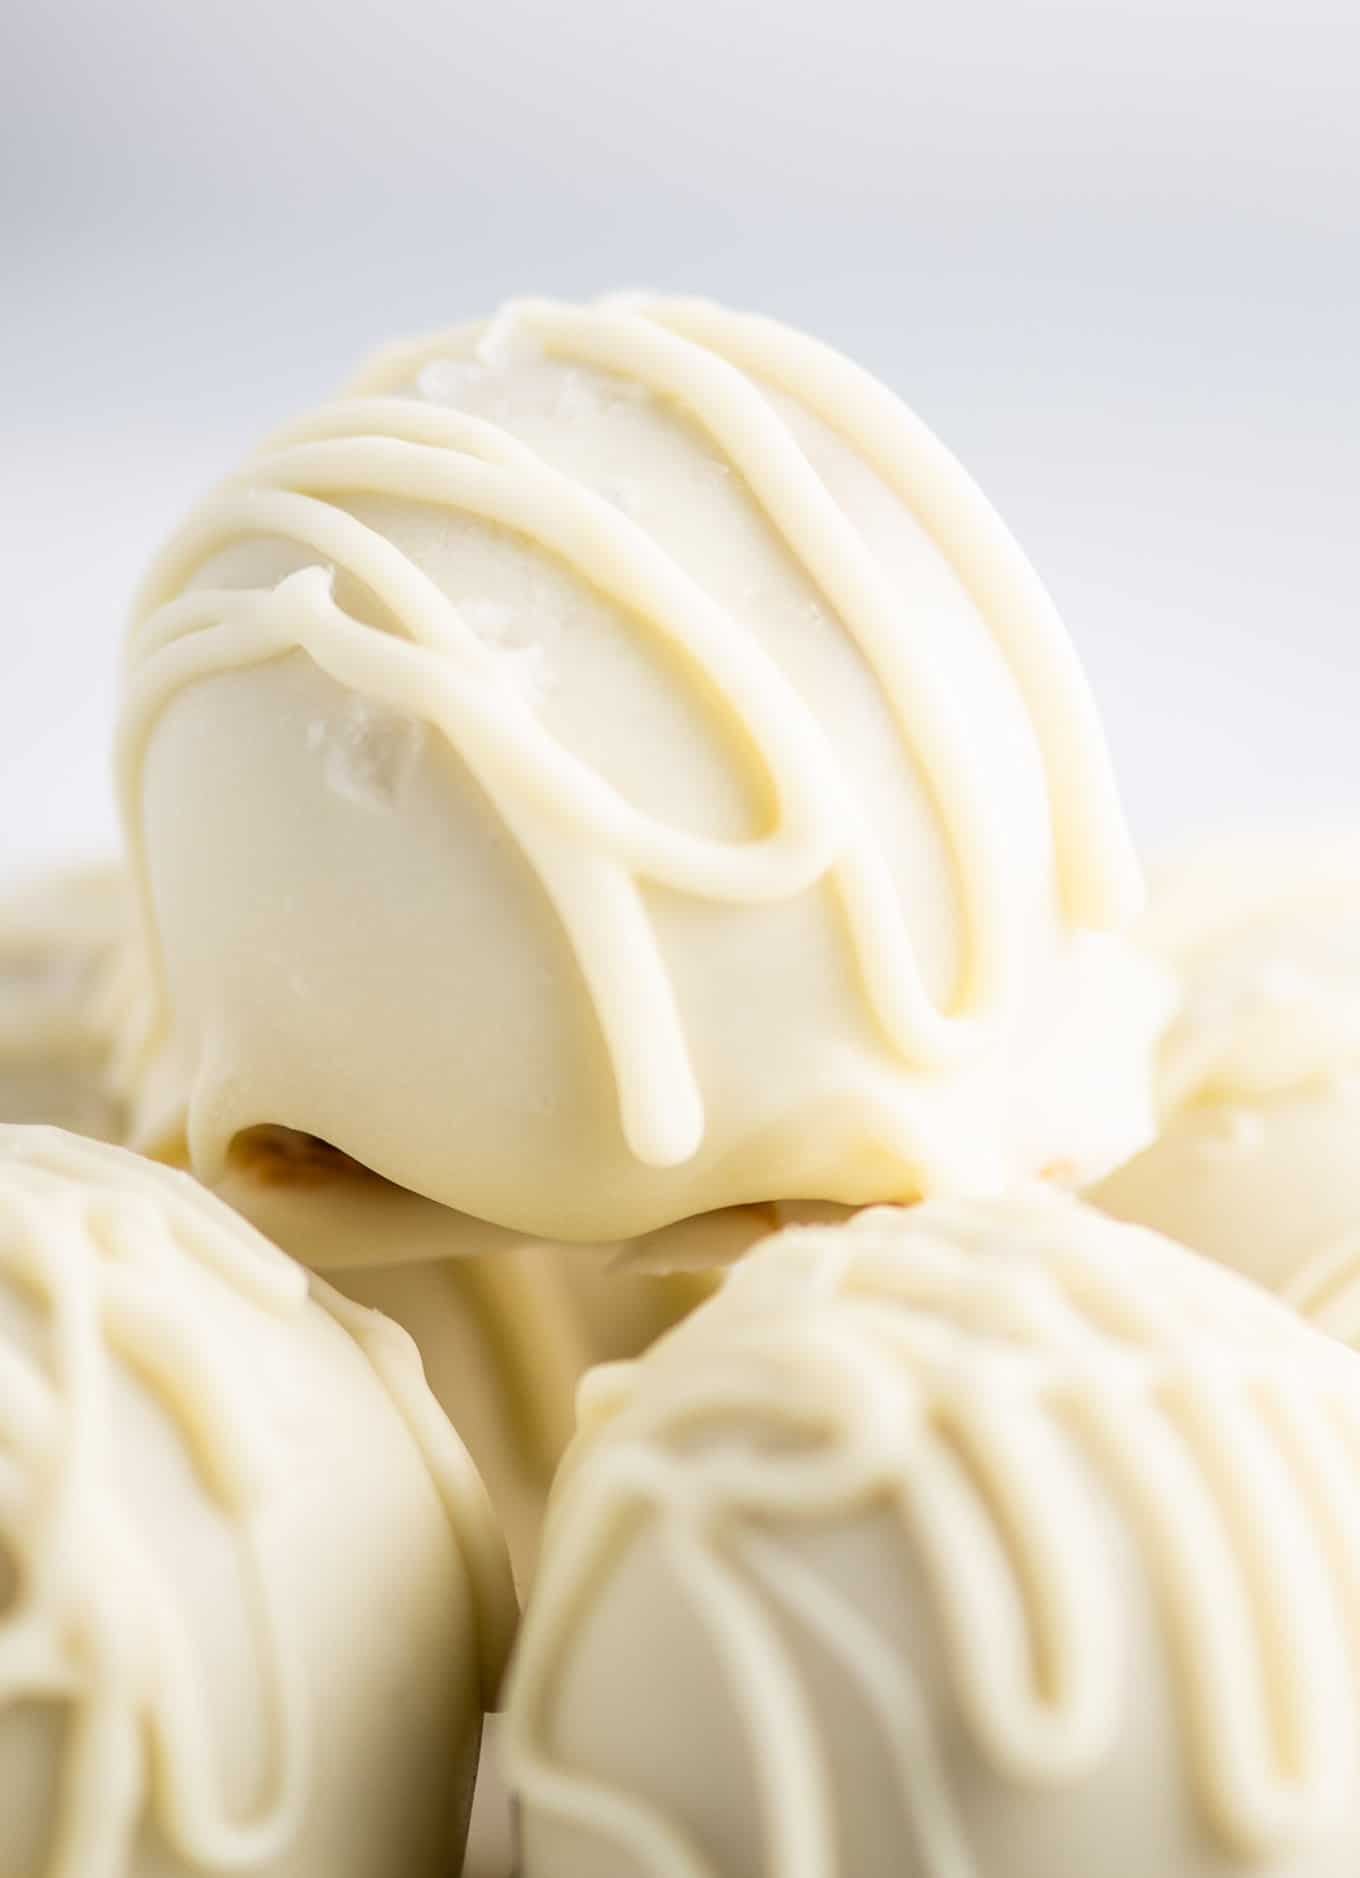 White Chocolate Peanut Butter Balls - Build Your Bite Flavours That Go With White Chocolate